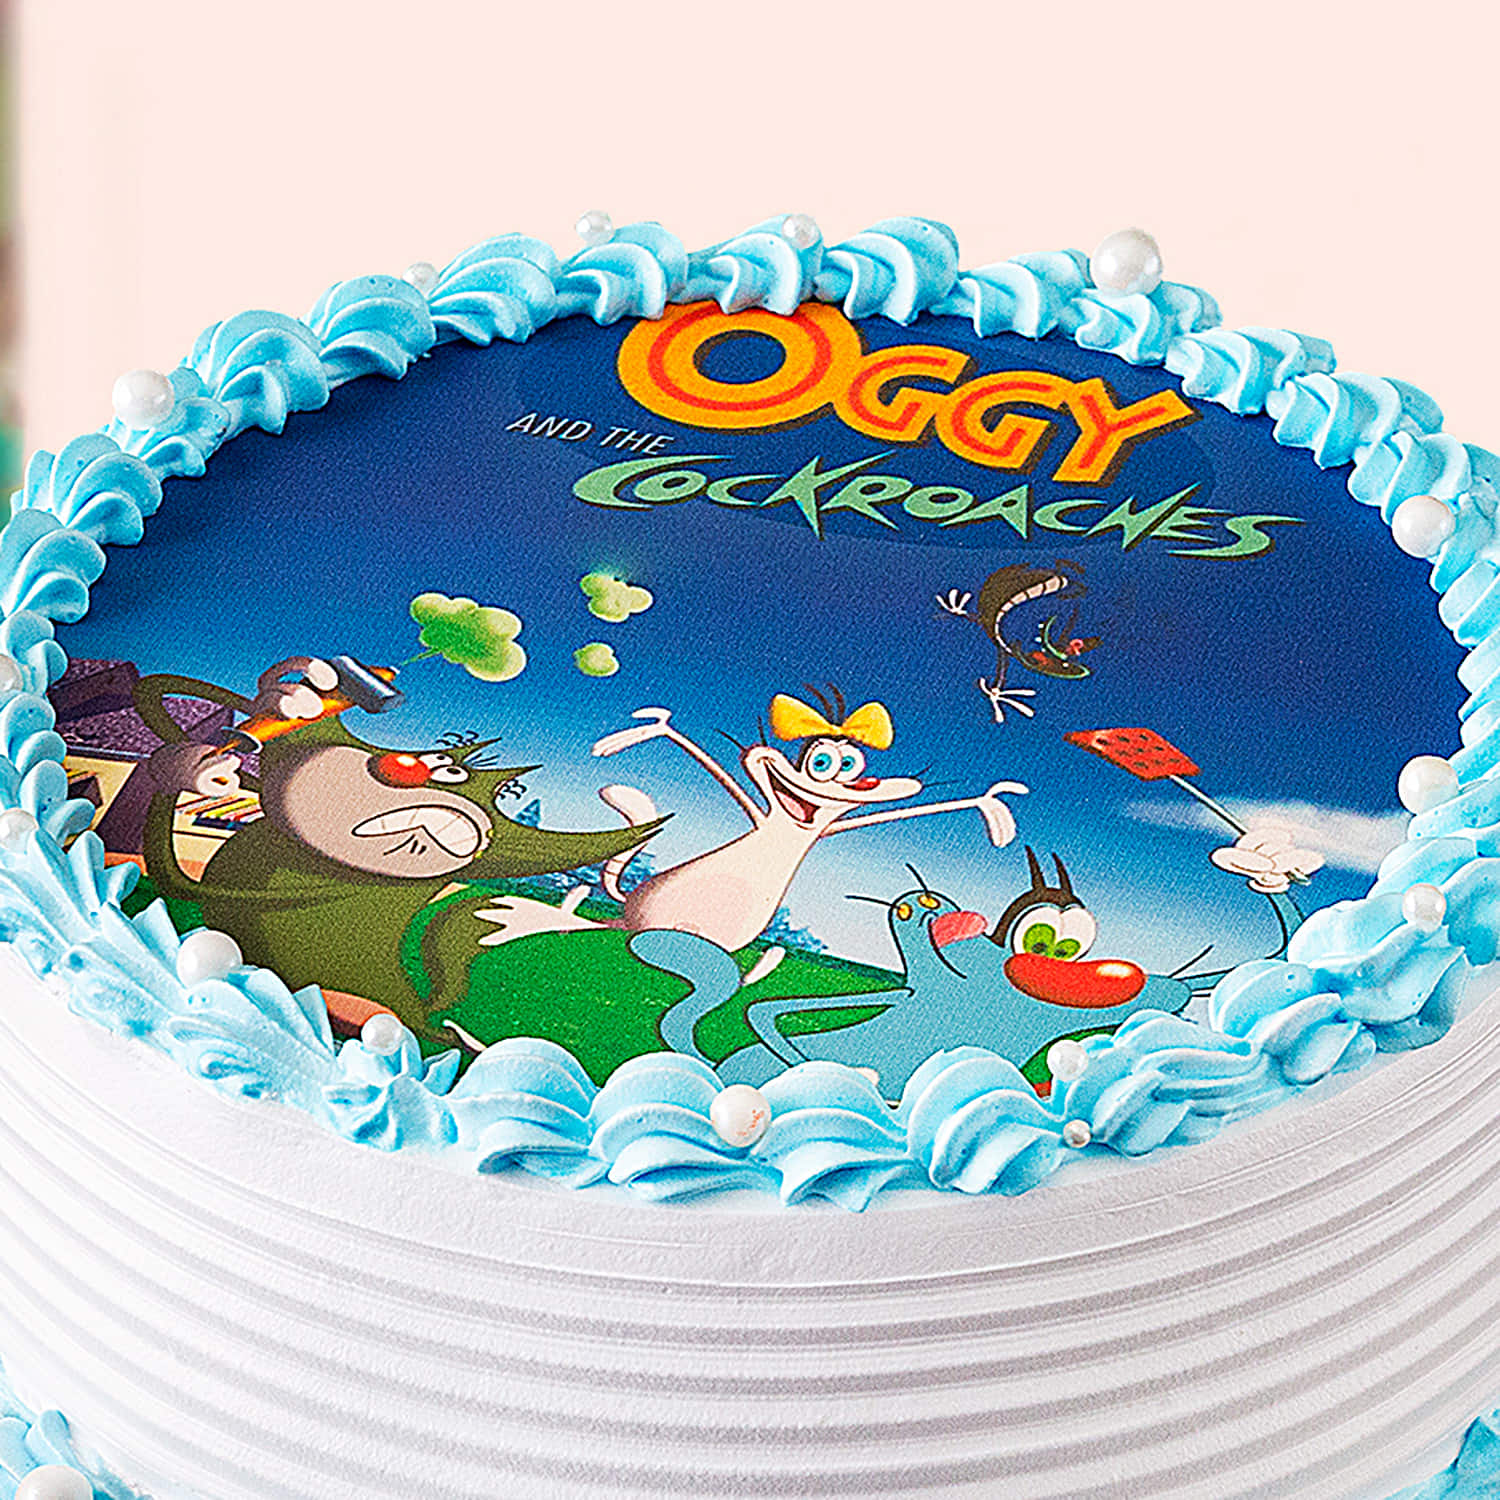 Queen of Cakes - This cake reminds me of my childhood, this was a great game  and it still lives on. #cakes#cakemakers#essexcakemakers#wickford #essex  #fondantcakes | Facebook